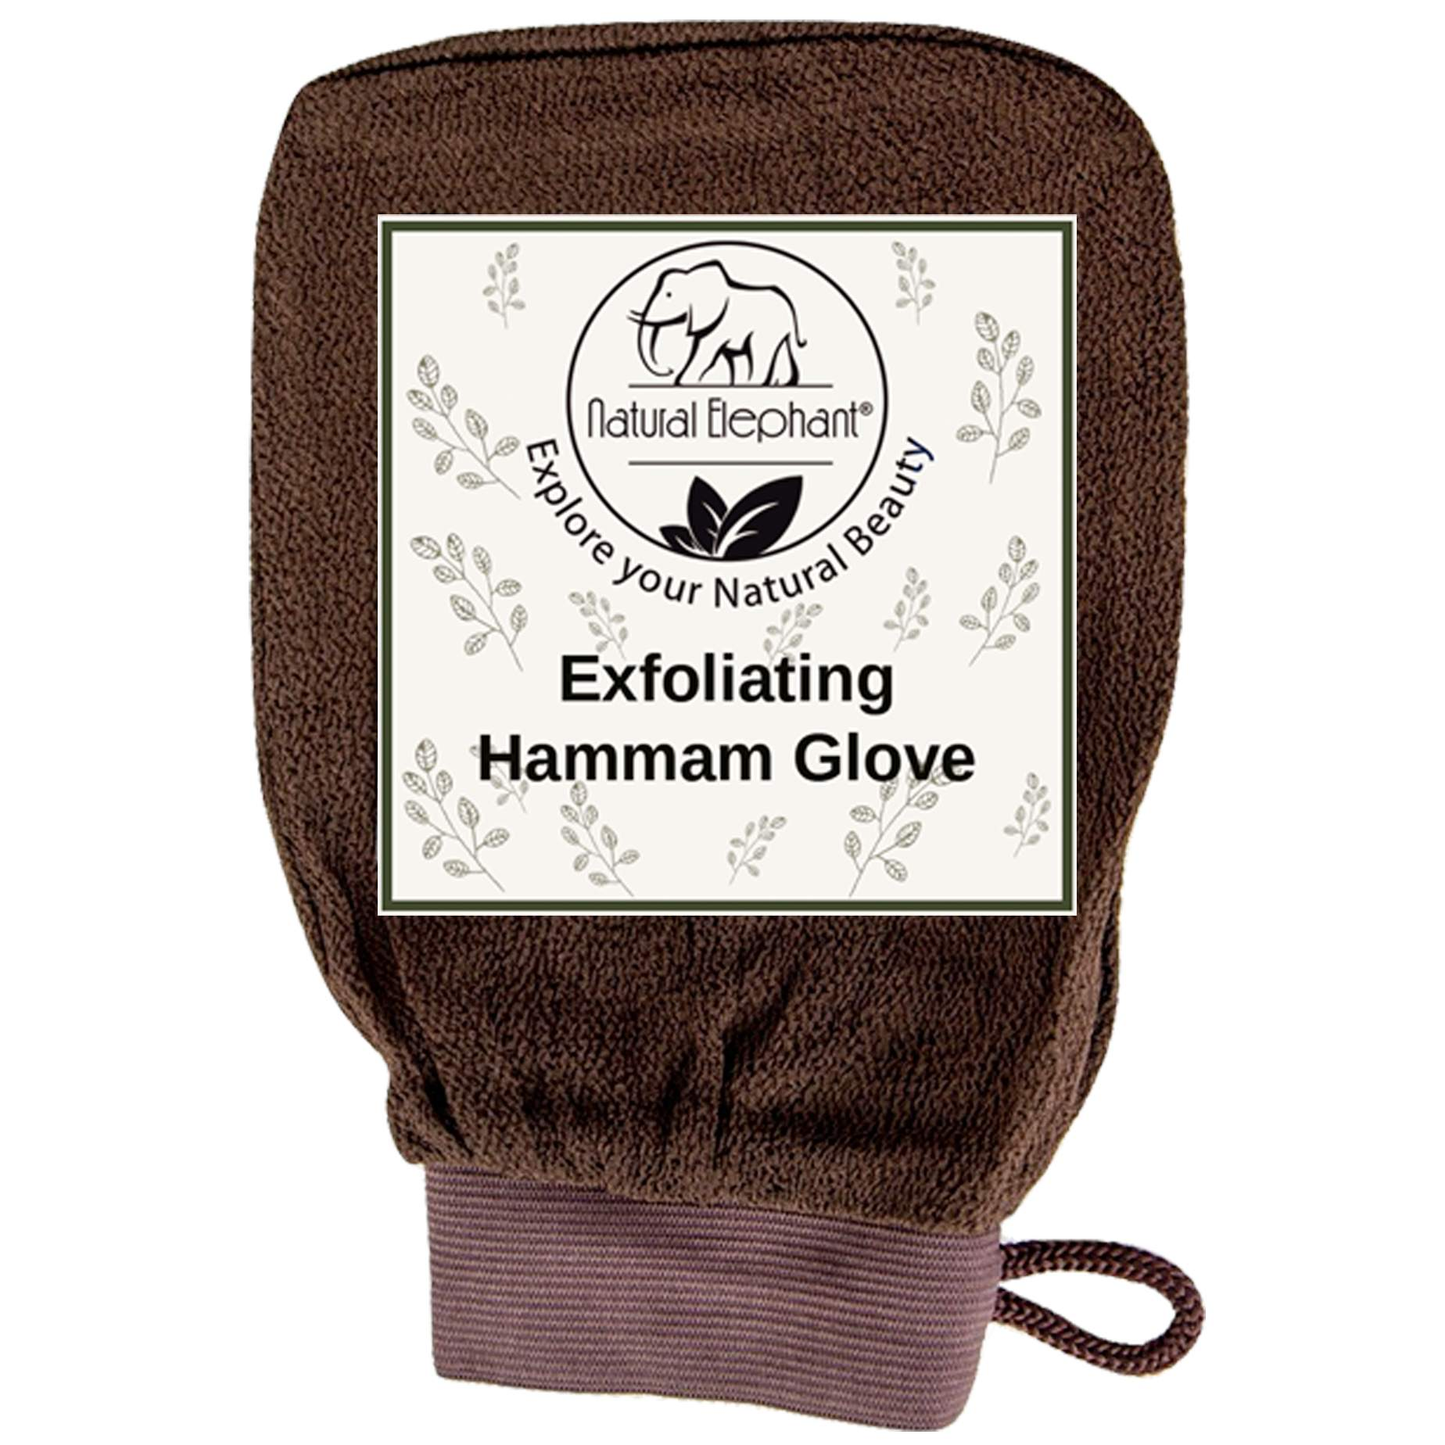 Natural Elephant Exfoliating Hammam Glove-Natural Elephant-BB_Bath and Shower,BB_Scrubs and Exfoliators,Brand_Natural Elephant,Collection_Bath and Body,Collection_Skincare,Concern_Acne & Blemishes,Concern_Combination Skin,Concern_Dry Skin,Concern_Dryness,Concern_Dullness,Concern_Large Pores,Concern_Oily Skin,Concern_Sensitive Skin,NATURAL_Morroccan Collection